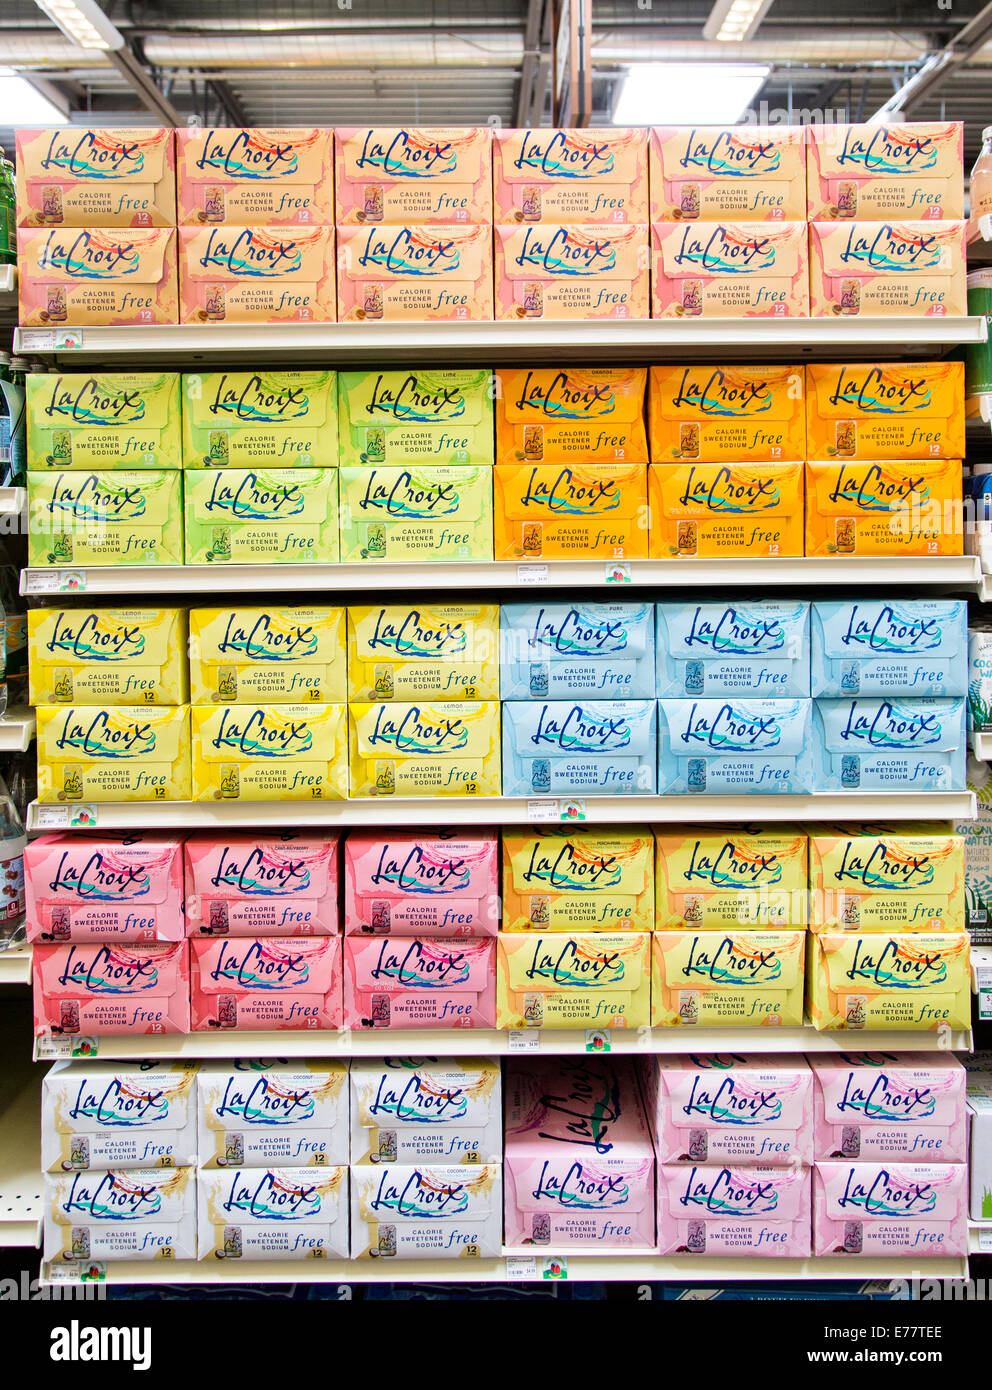 Grocery store with shelves socked with La Croix sparking water. Stock Photo